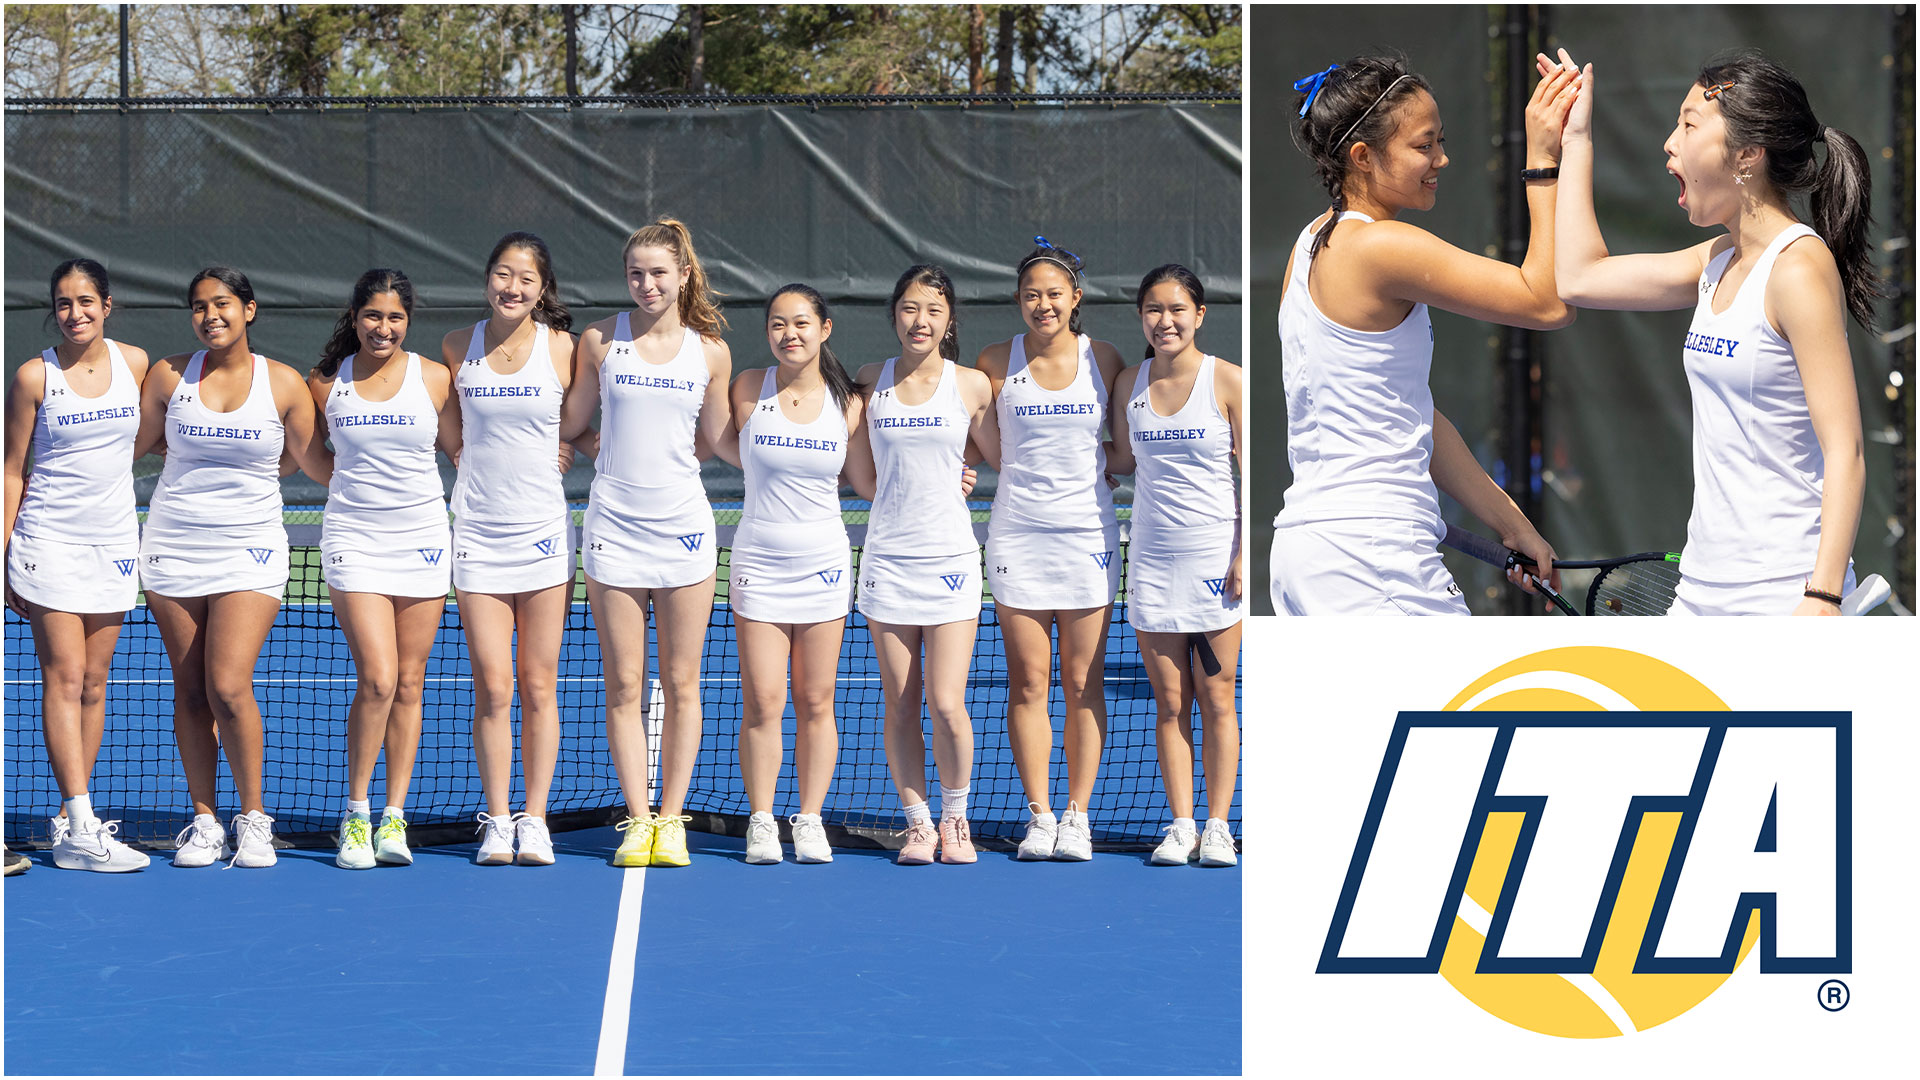 Wellesley tennis has been named an ITA All-Academic Team (Frank Poulin)